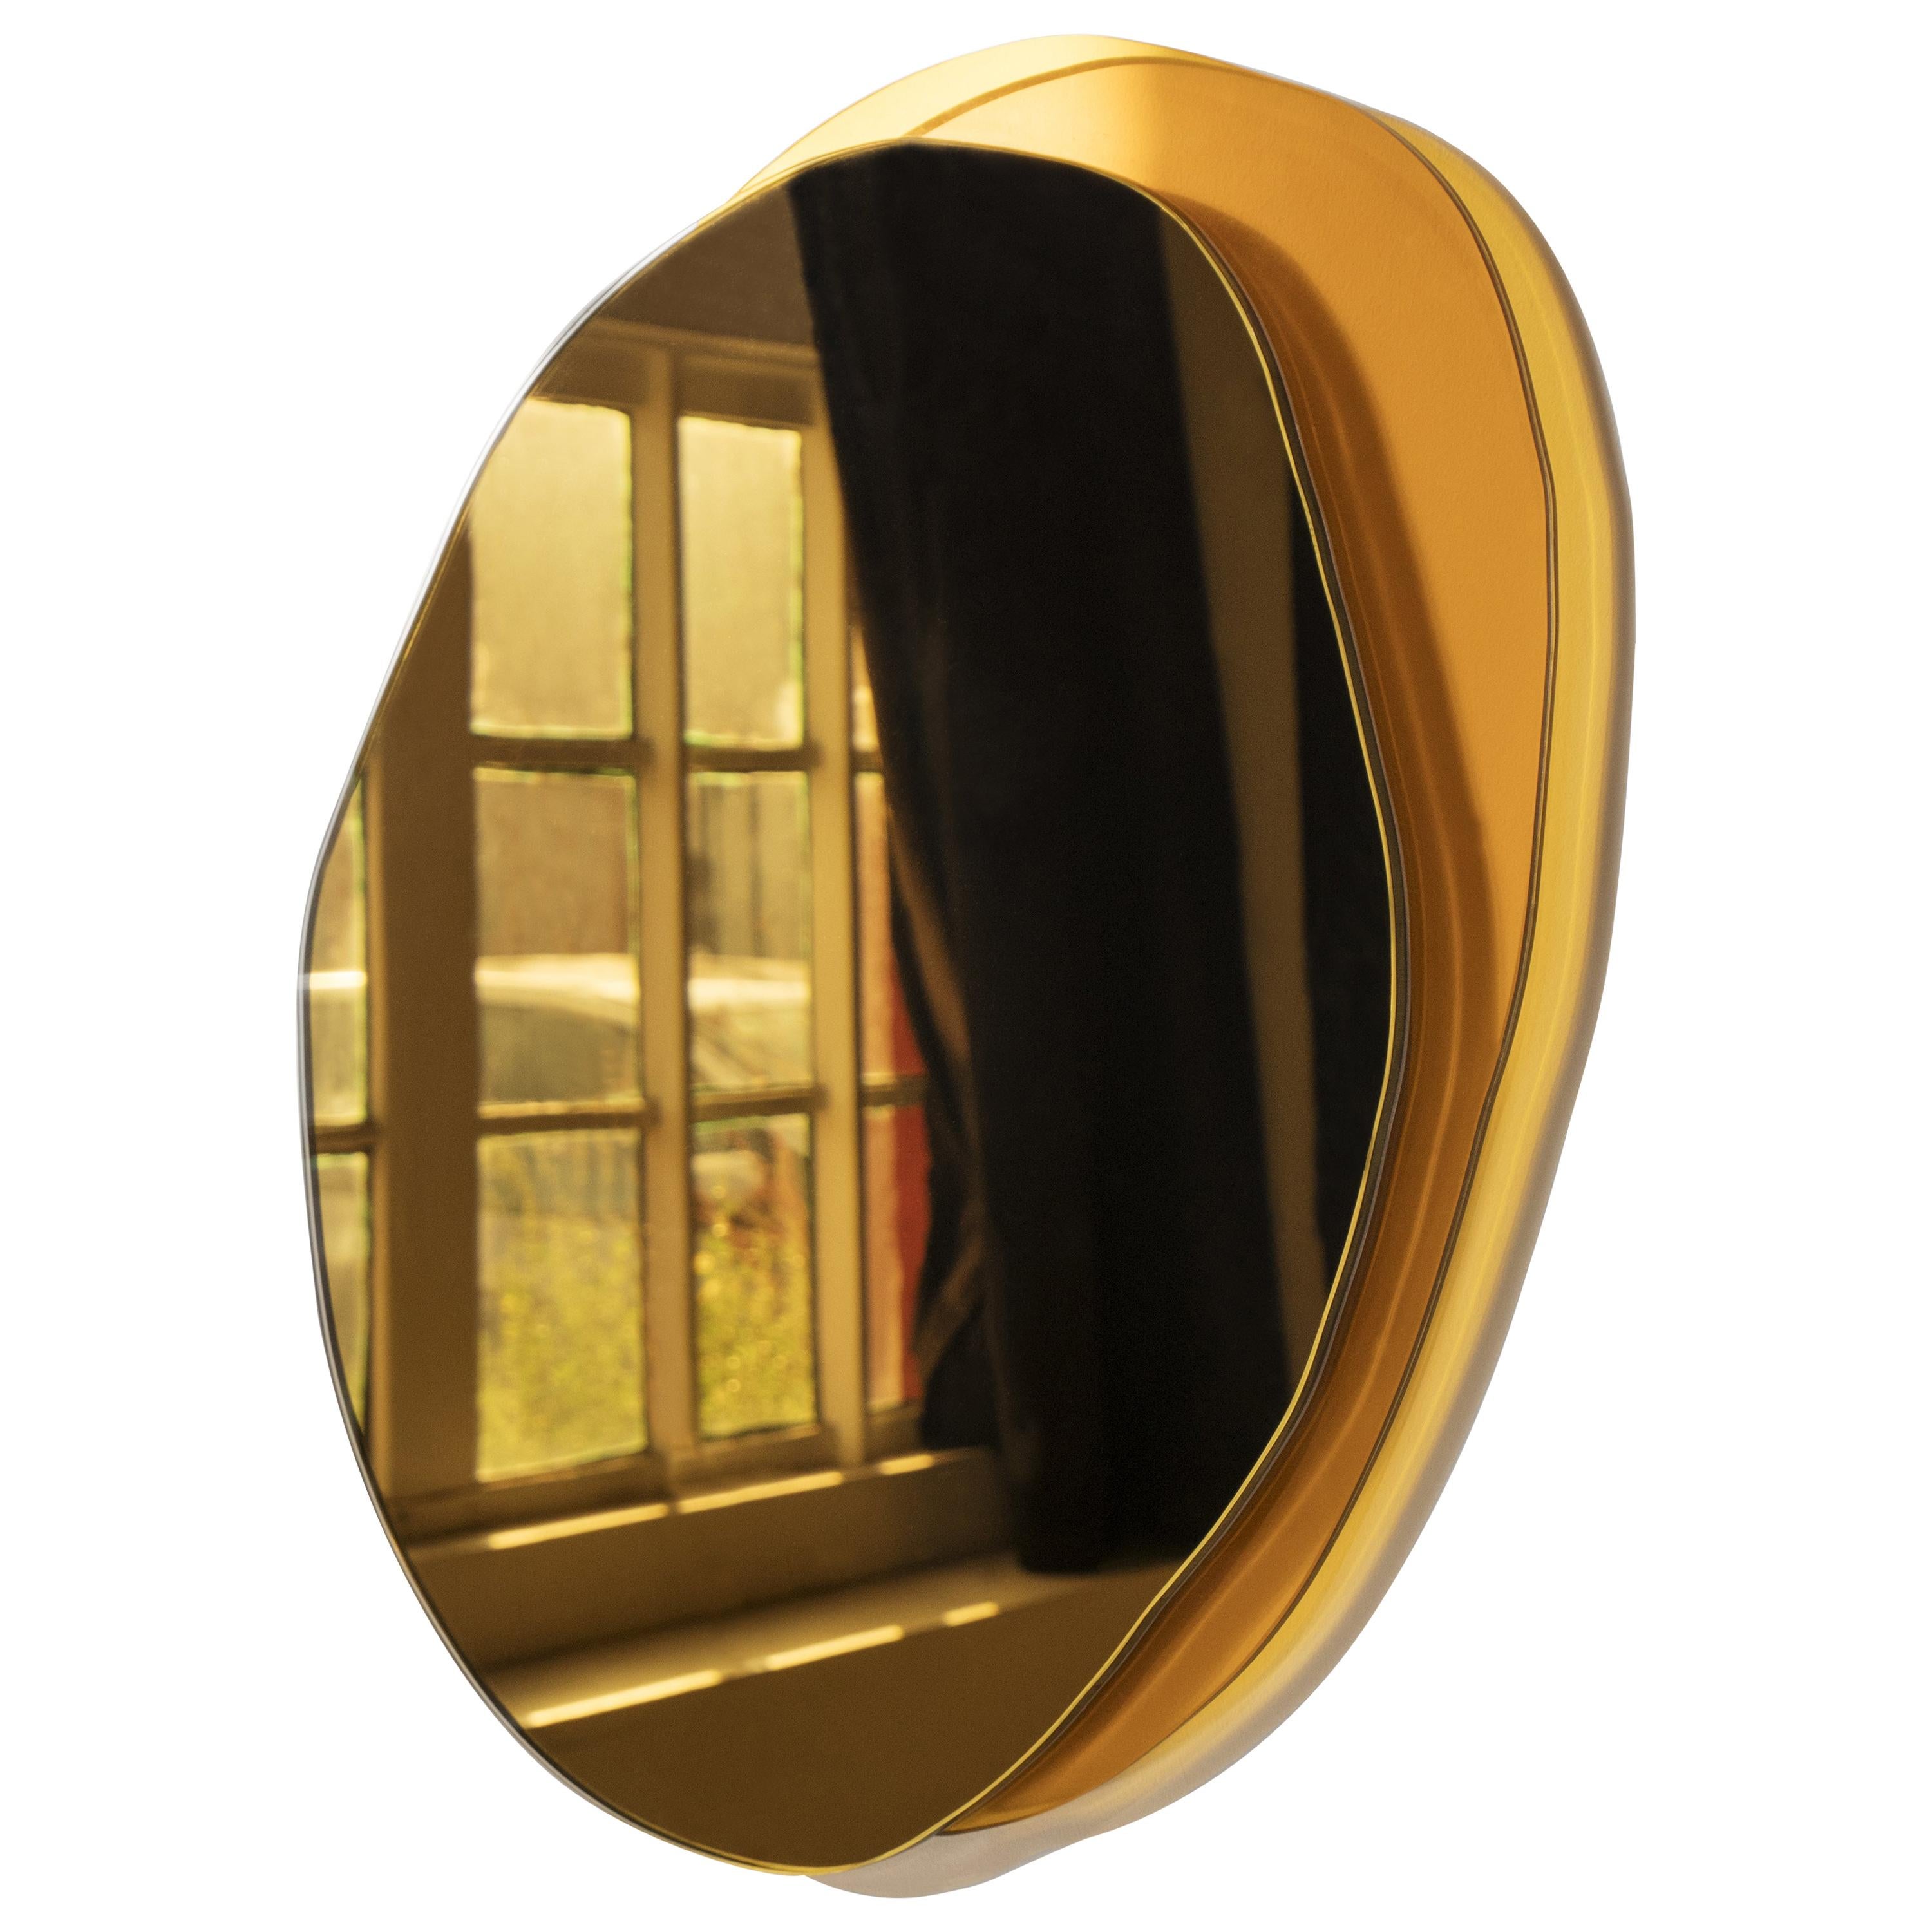 Ombrée small hand-sculpted mirror, Laurene Guarneri
Limited edition.
Handmade.
Gold mirror and yellow glass.
Sizes: 40 x 2.5 cm

(Could be made to order in other dimensions).
Hang hook supplied.

Laurène Guarneri is a designer based in